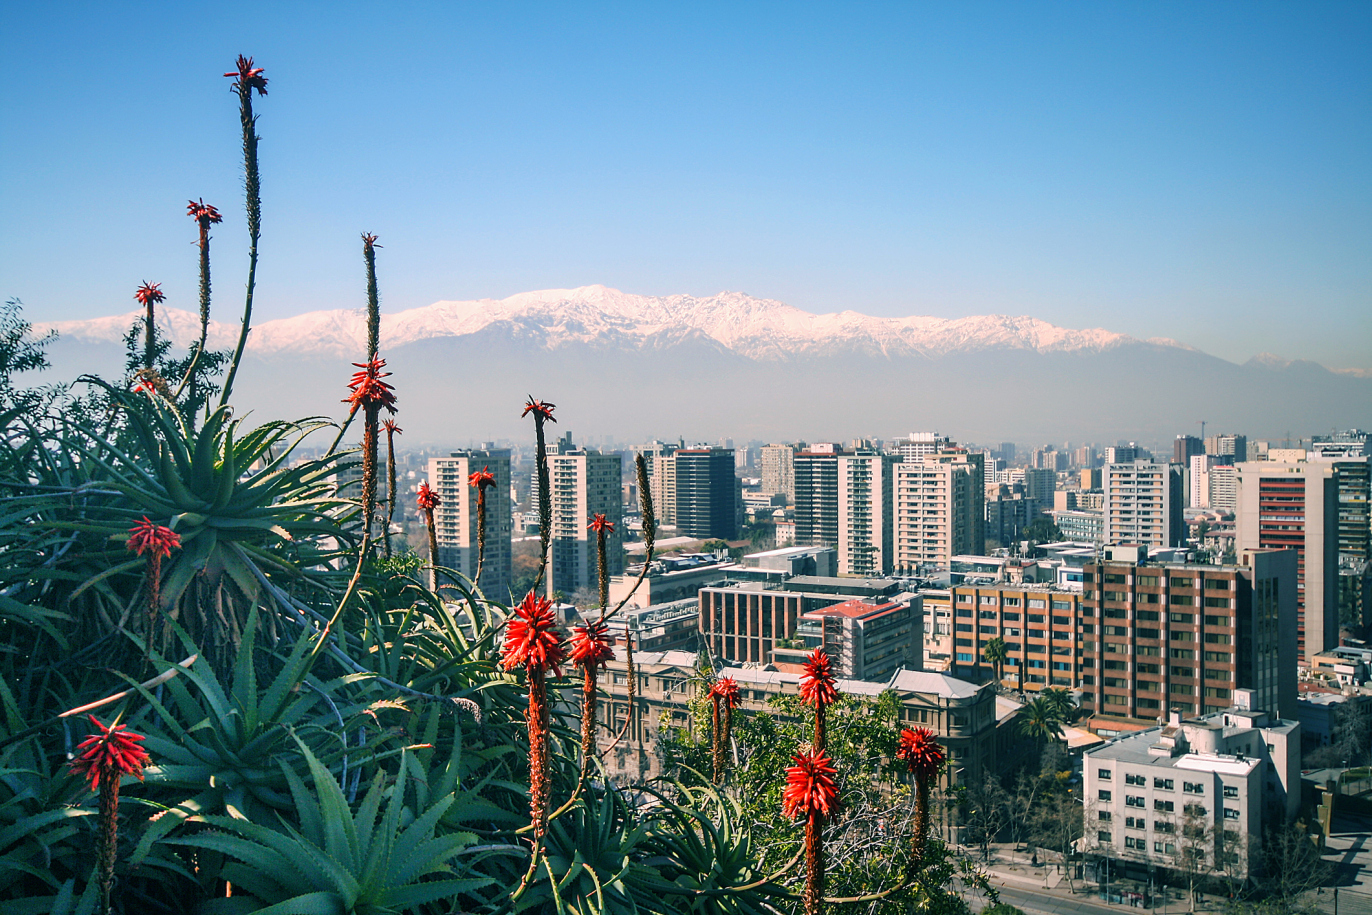 A new era for startup investing in Latin America